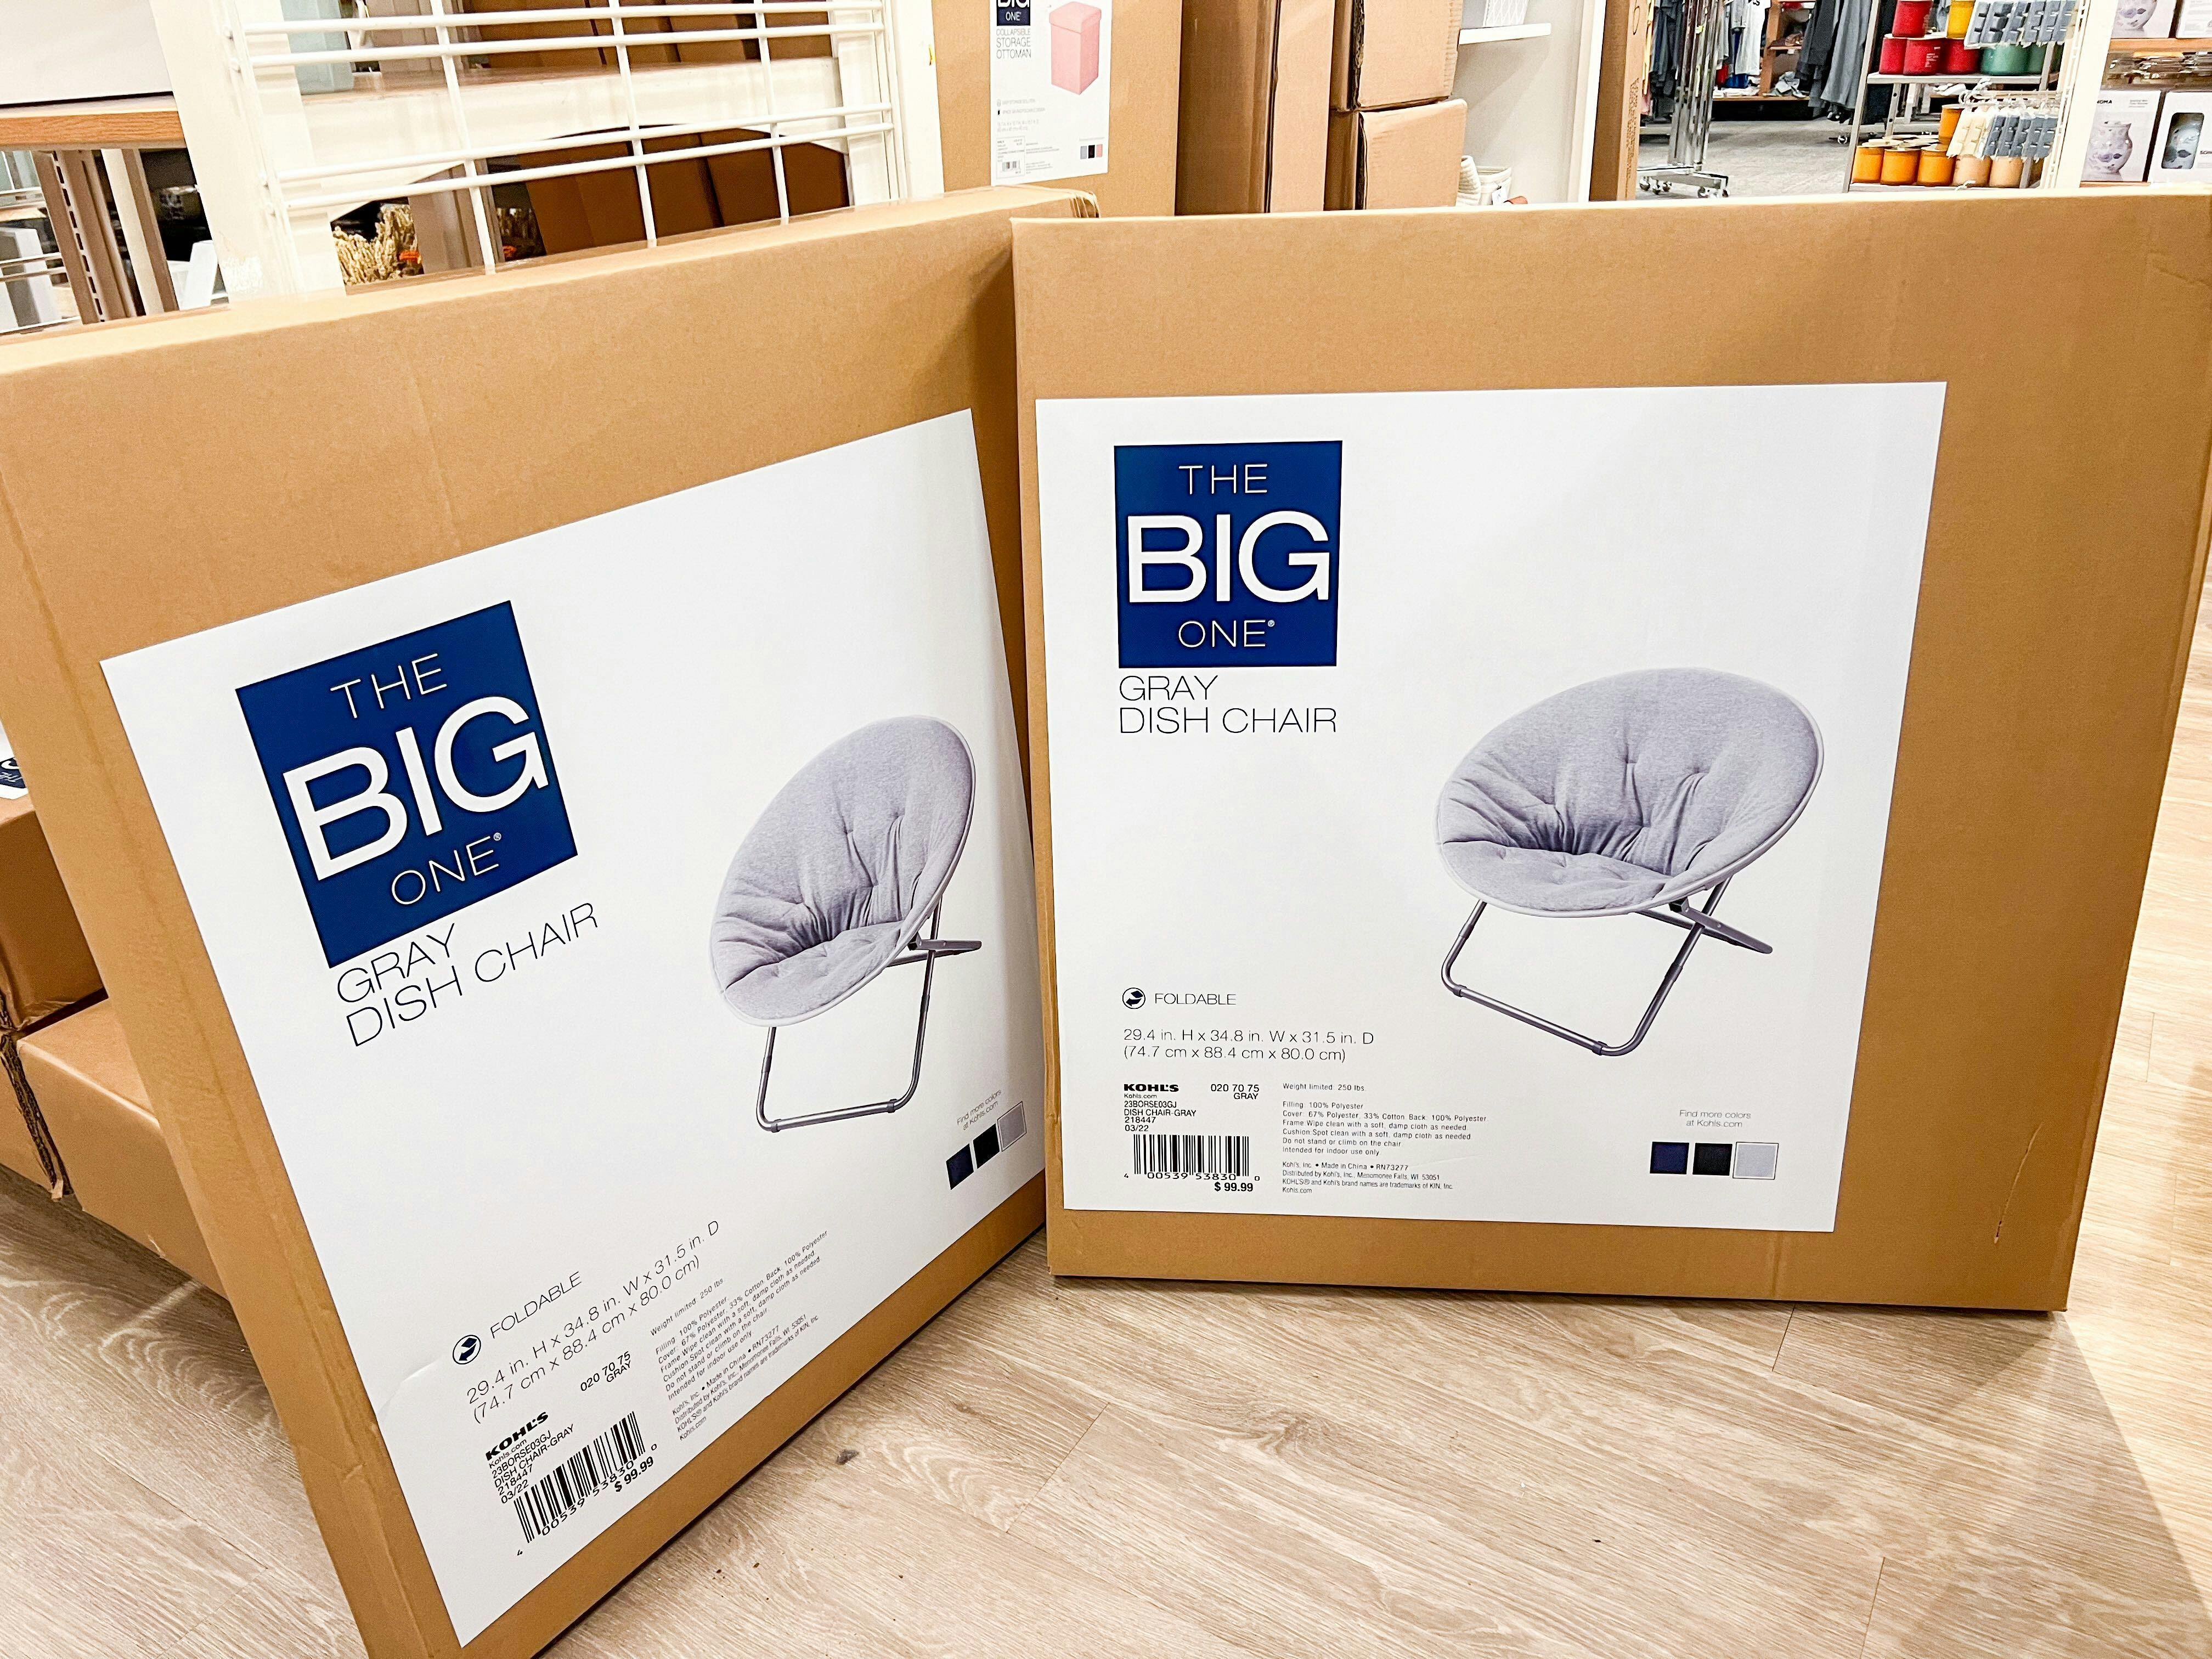 The Big One® Folding Dish Chair in box at kohls